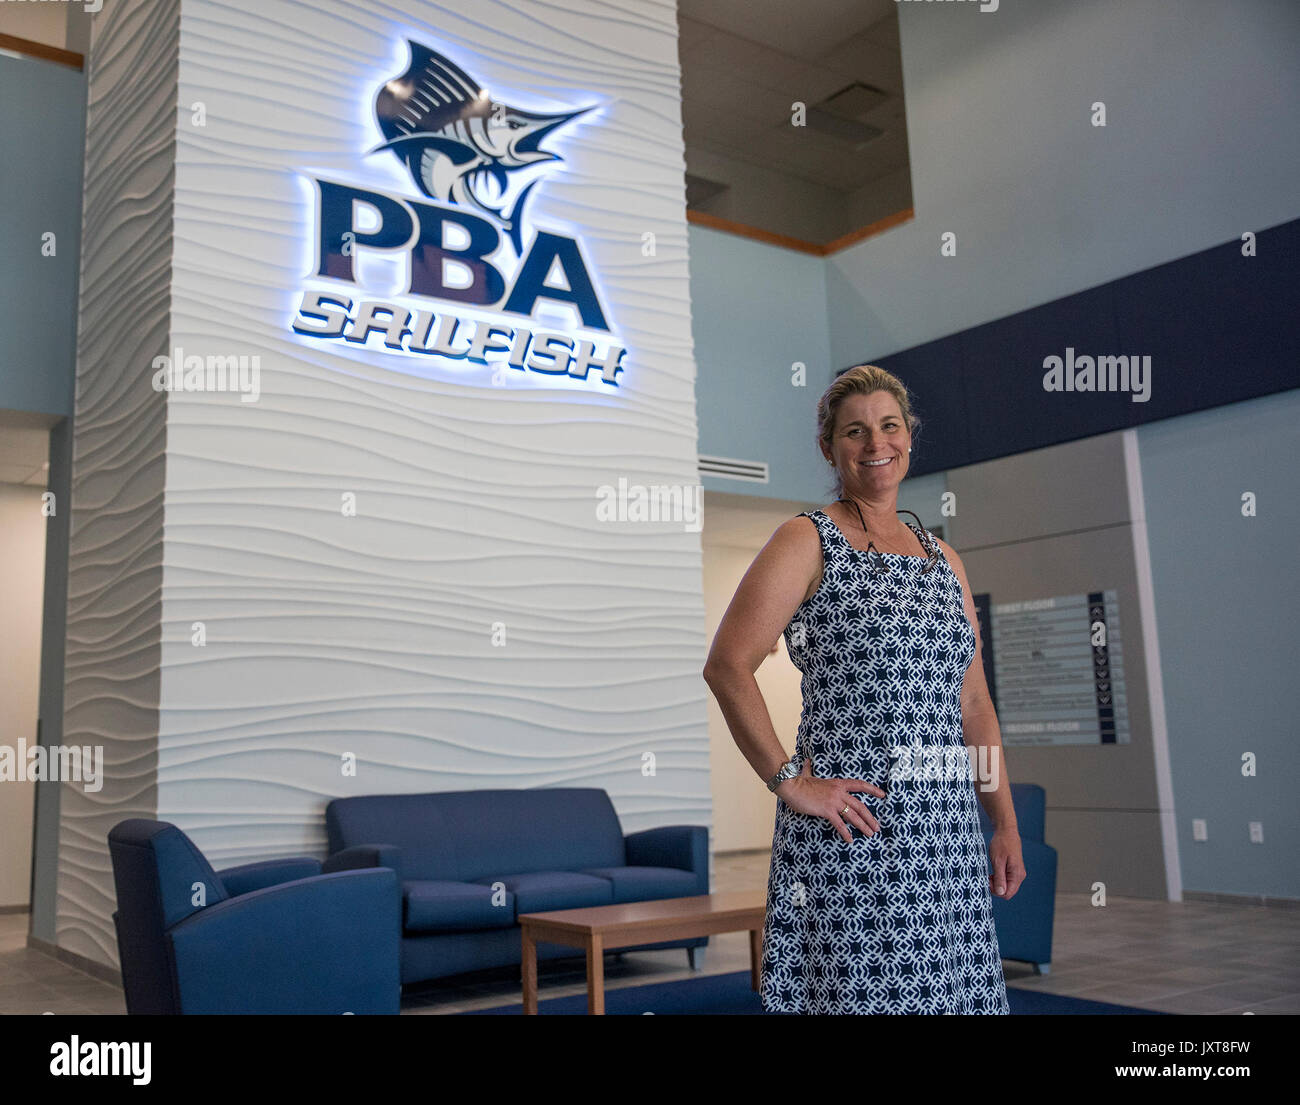 West Palm Beach, Florida, USA. 17th Aug, 2017. Palm Beach Atlantic University Athletic Director Carolyn Stone poses for a portrait in the lobby of Palm Beach Atlantic University's new John & Sheila Rinker Sports Center in West Palm Beach, Fla., on Thursday, August 17, 2017. The $9 million athletics facility represents a shift of focus for the university toward athletics. Credit: Andres Leiva/The Palm Beach Post/ZUMA Wire/Alamy Live News Stock Photo